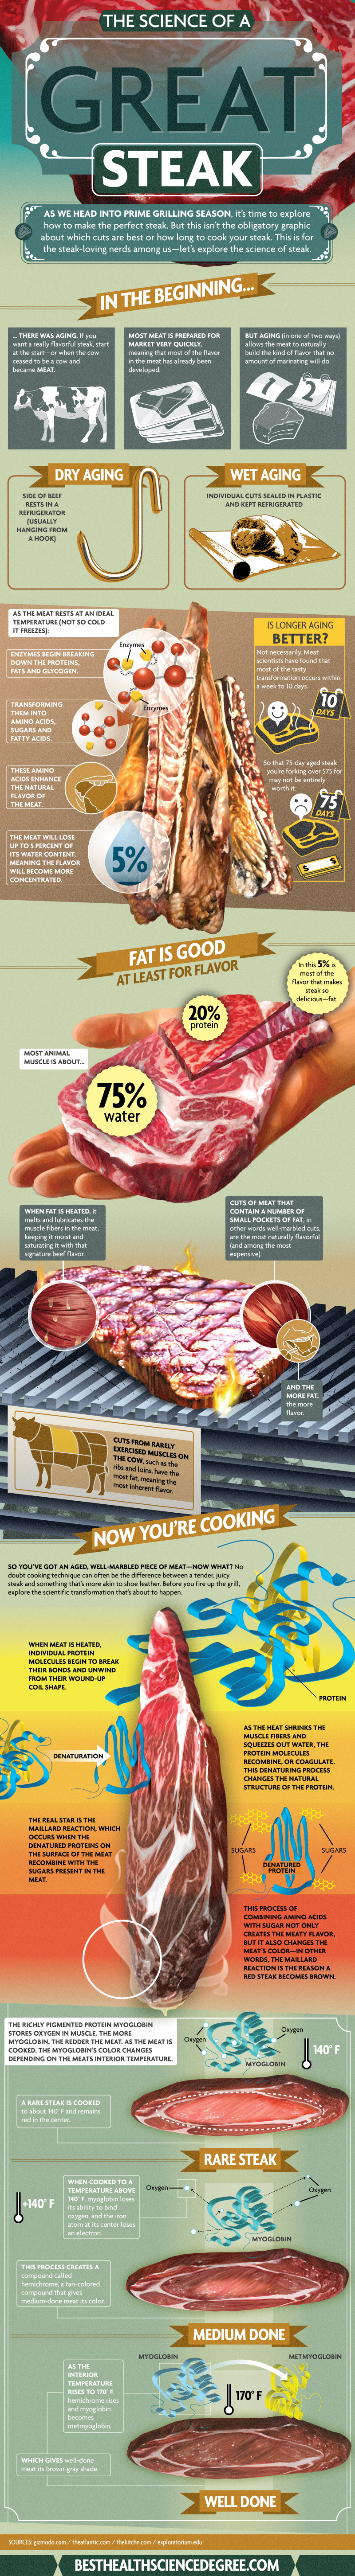 Facts About Beef and Steaks